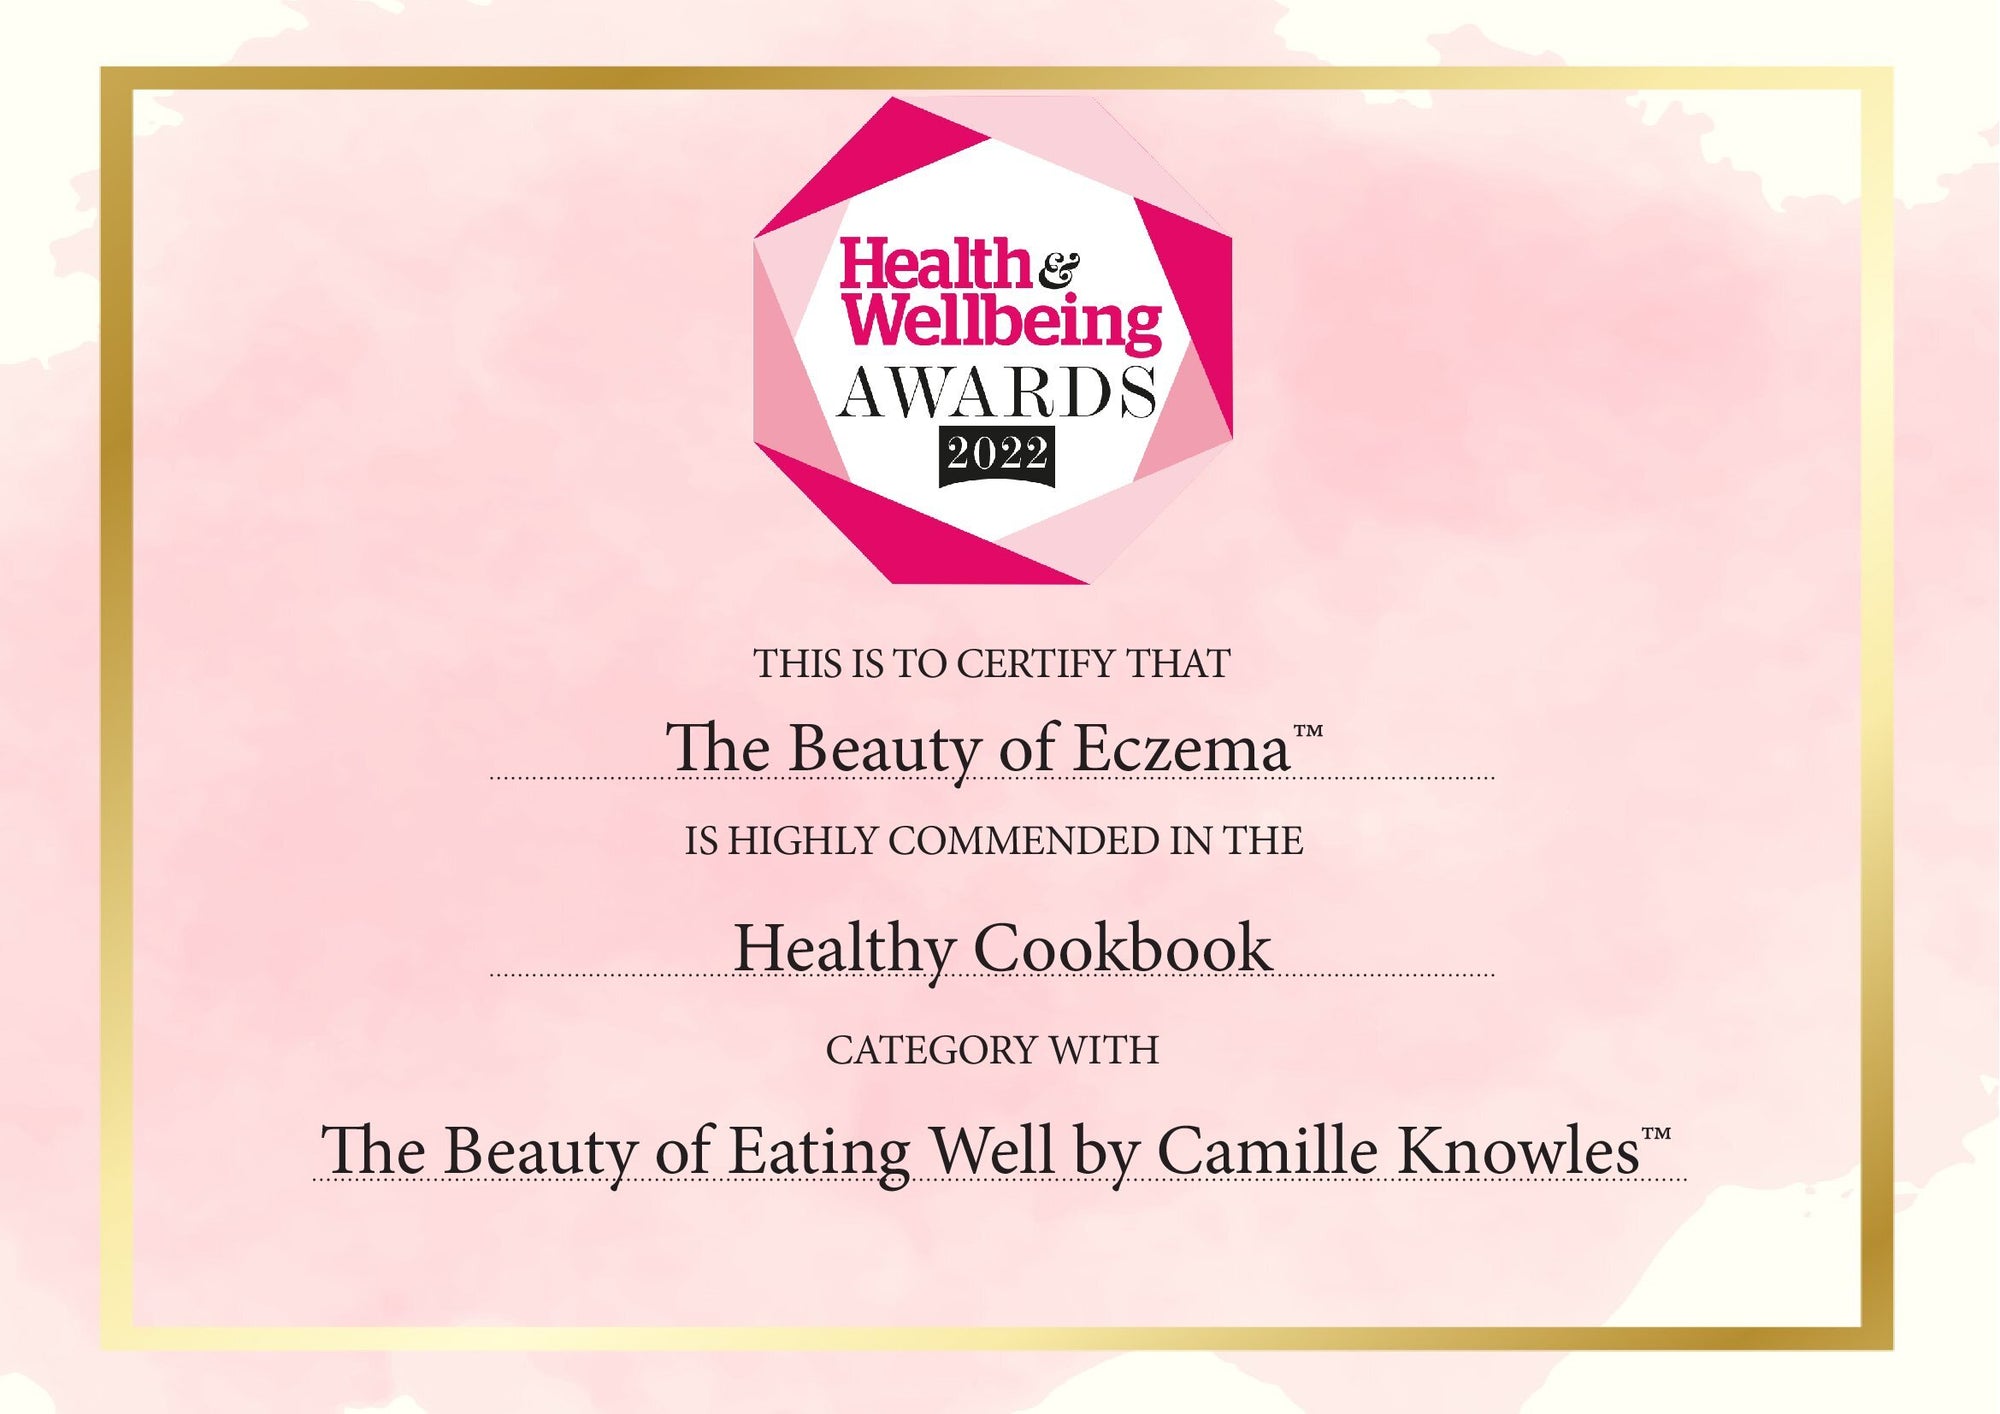 The Beauty of Eating Well by Camille Knowles™ Cookbook